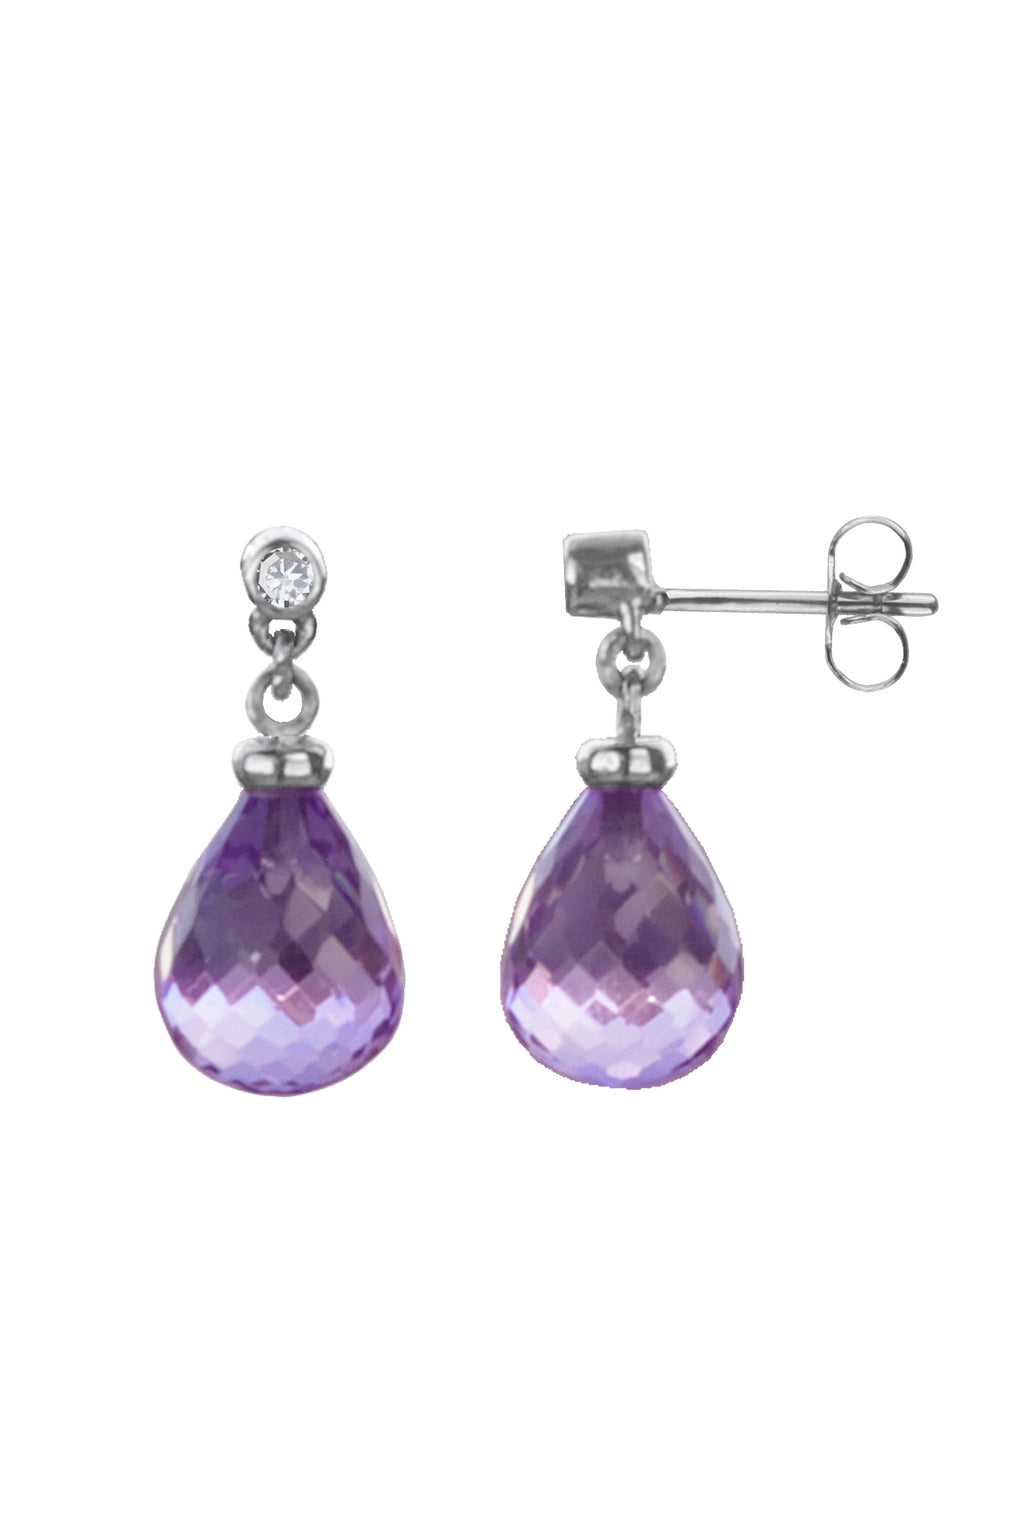 White Gold Drop Earrings with Diamonds & Amethysts